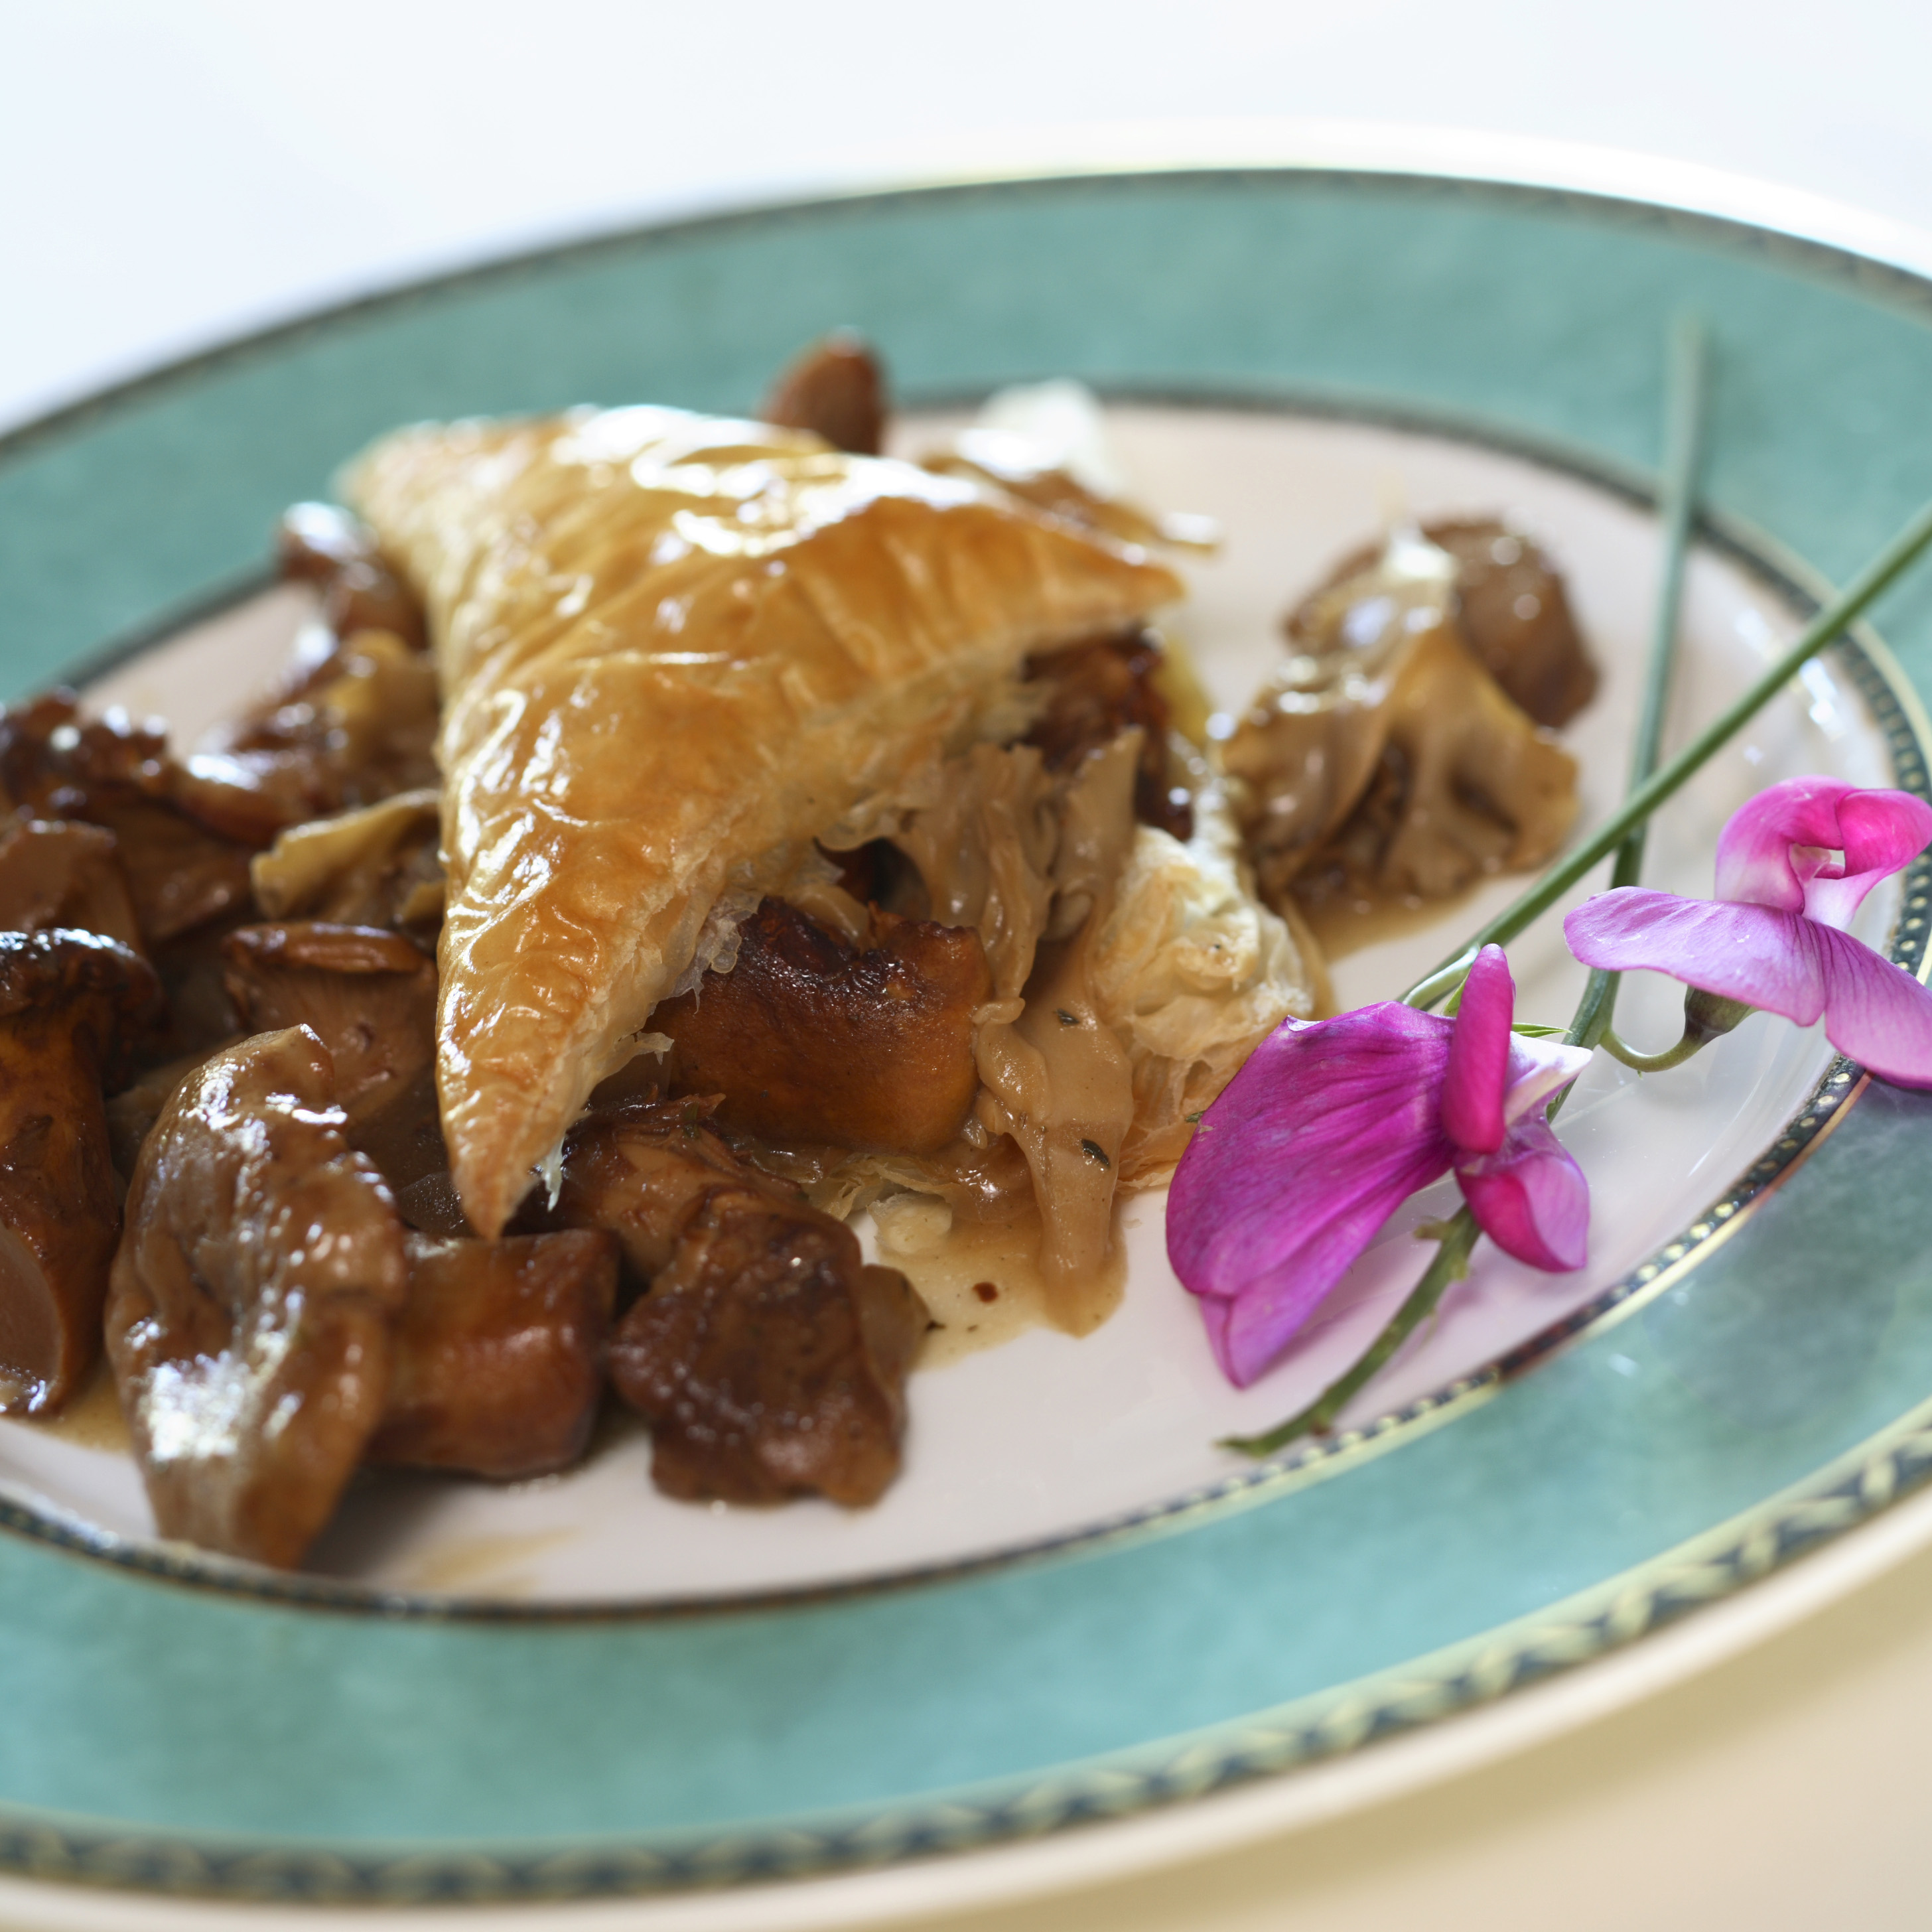 Wild Mushrooms and Puff Pastry at the Joel Palmer House